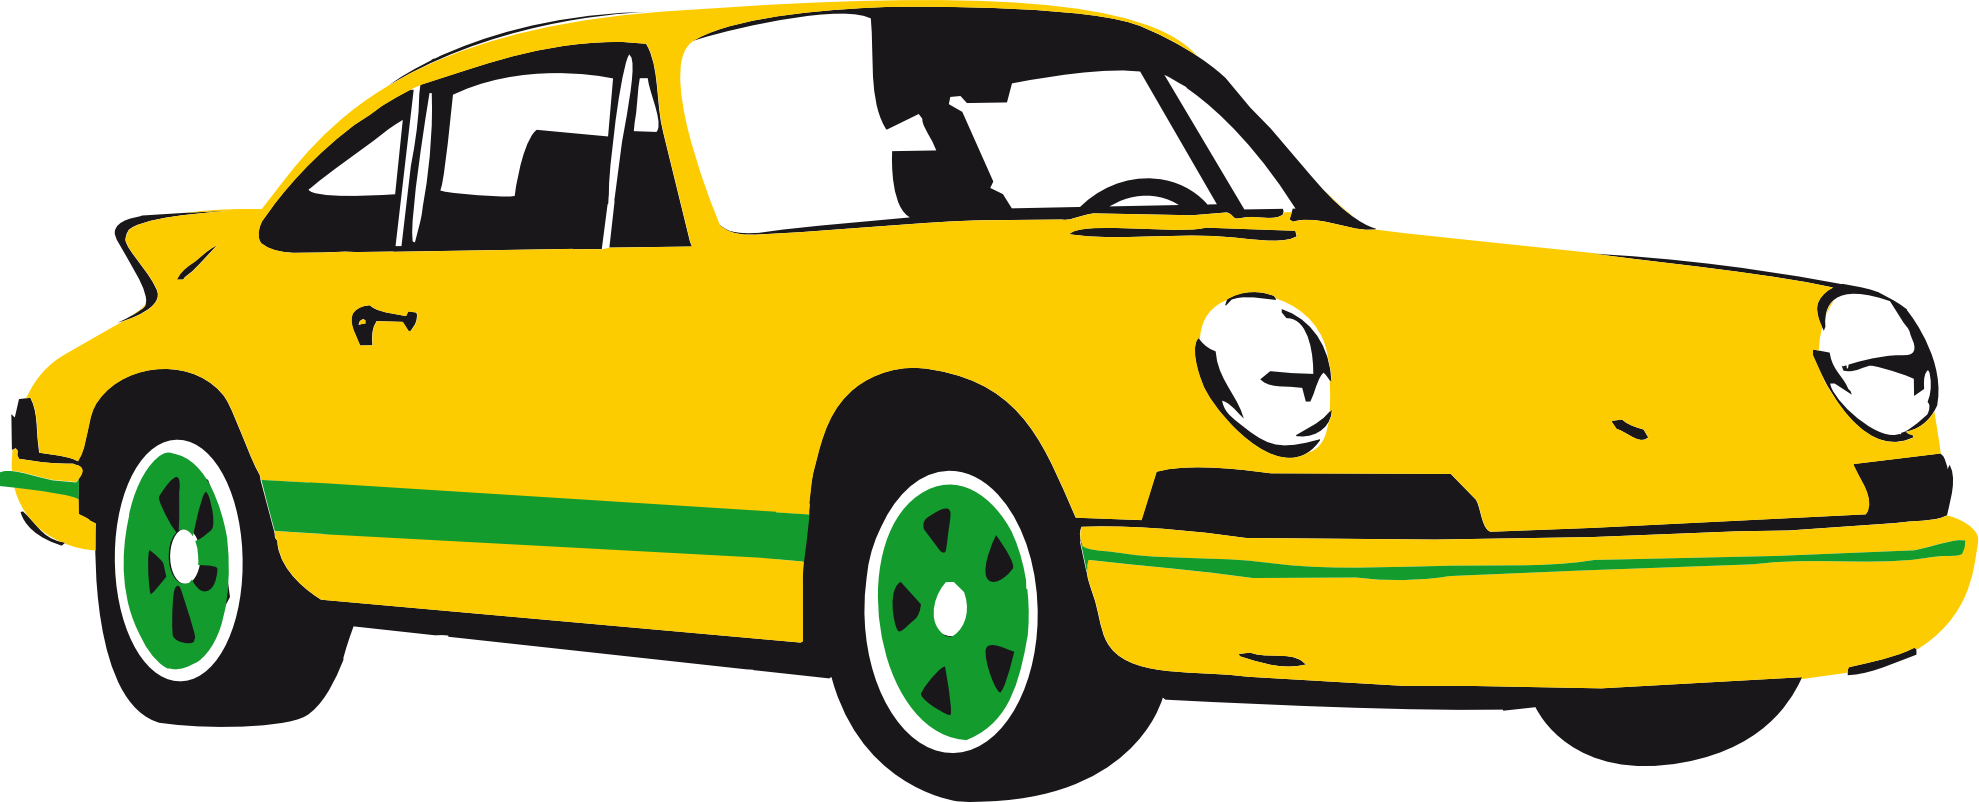 car clipart vector free download - photo #46